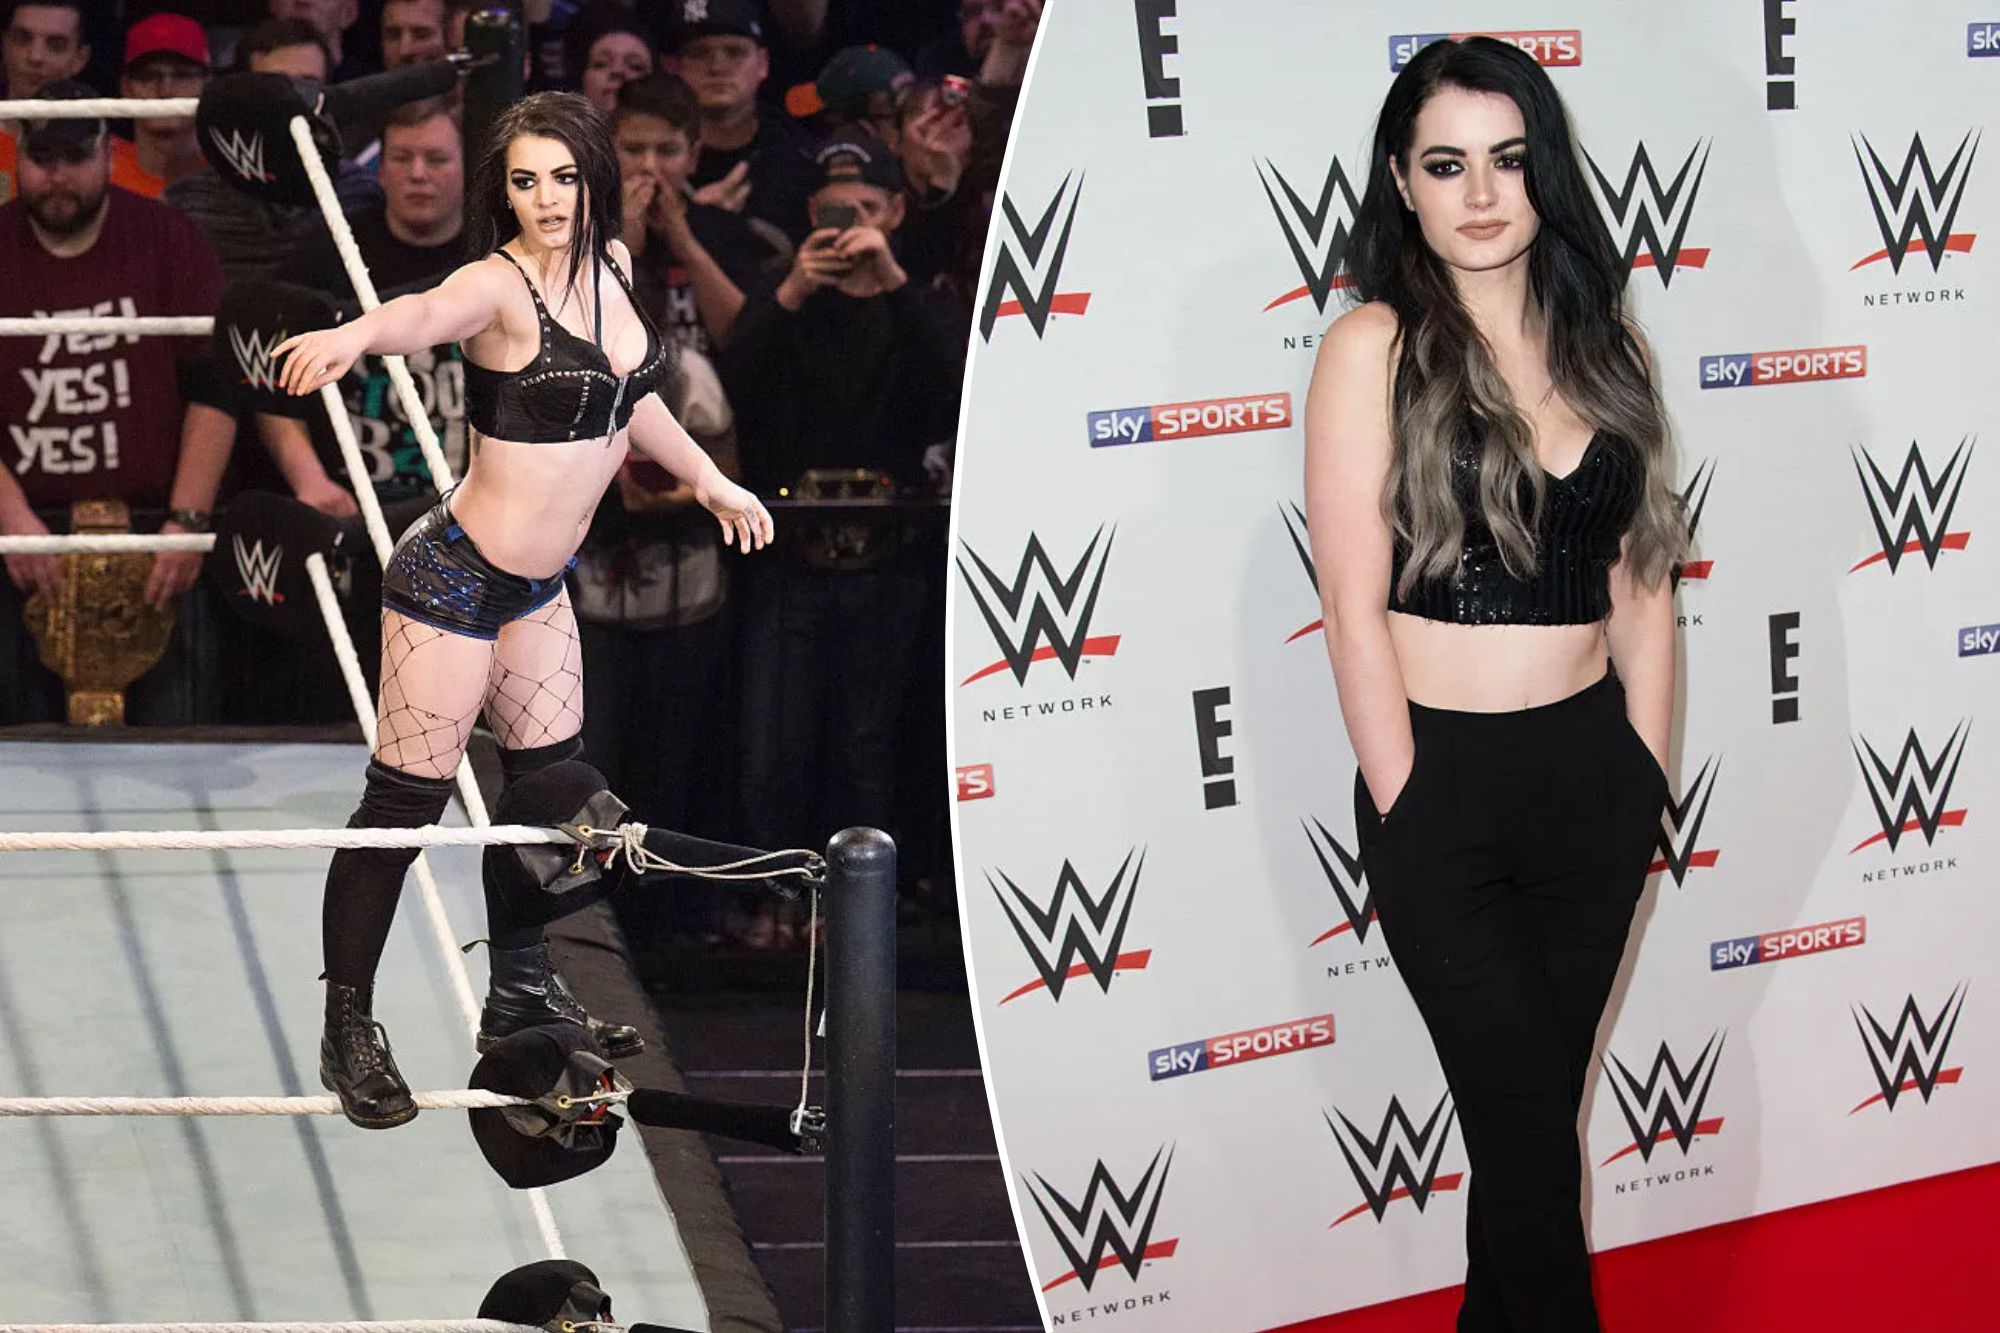 Saraya, who performed in WWE as Paige, revealed that she wasn't sure she wanted to live anymore when her nude photos and video leaked in 2017.